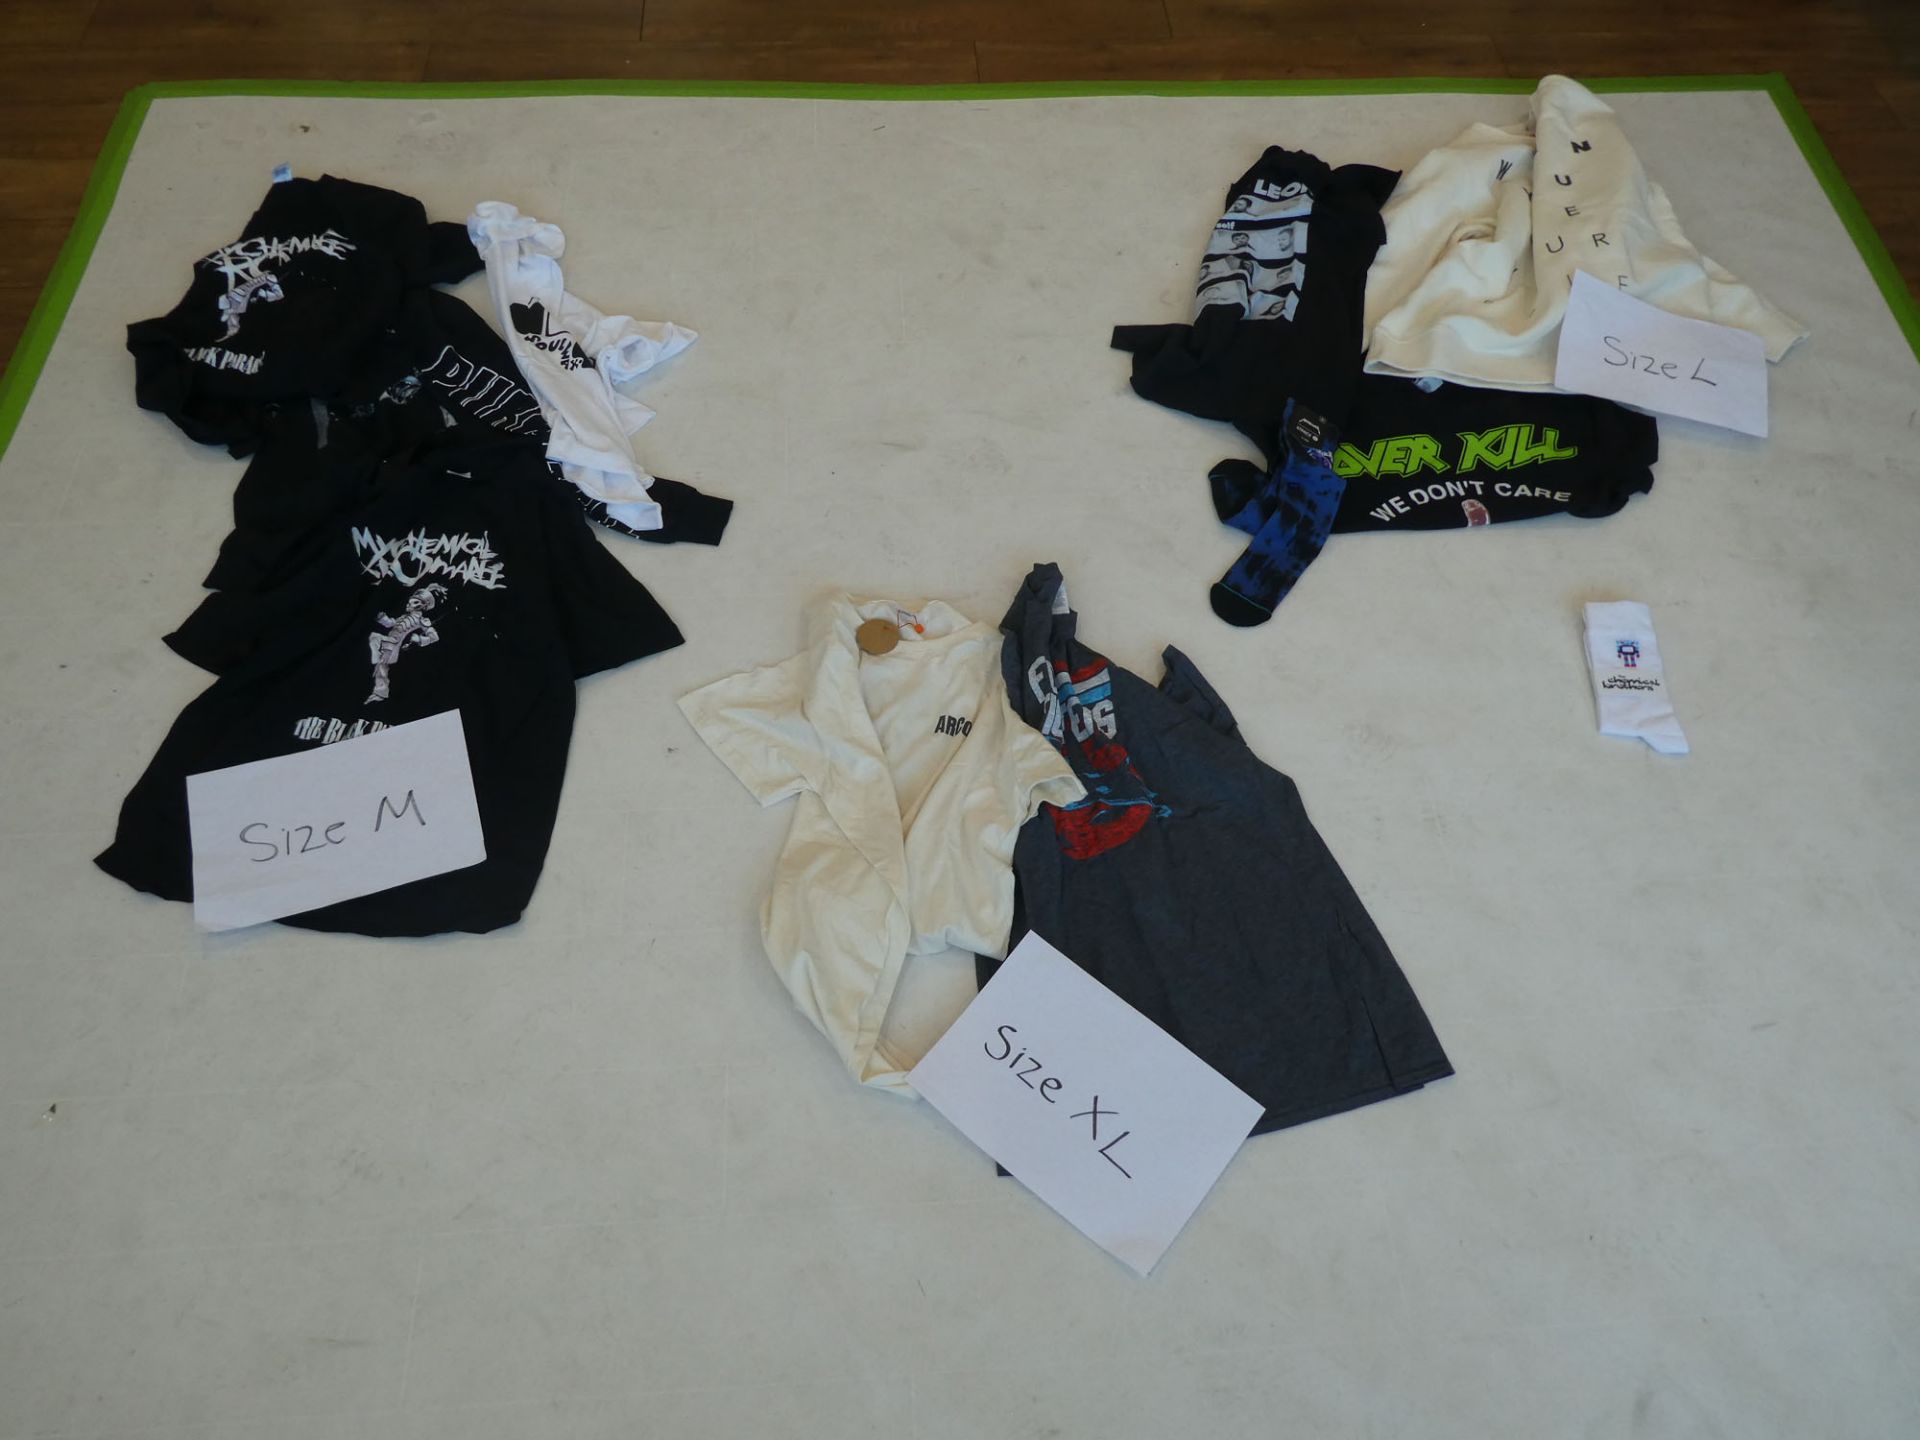 Rock shirts and socks including Metallica and Chemical Brothers socks, and Overkill, Foo Fighters, - Image 2 of 3